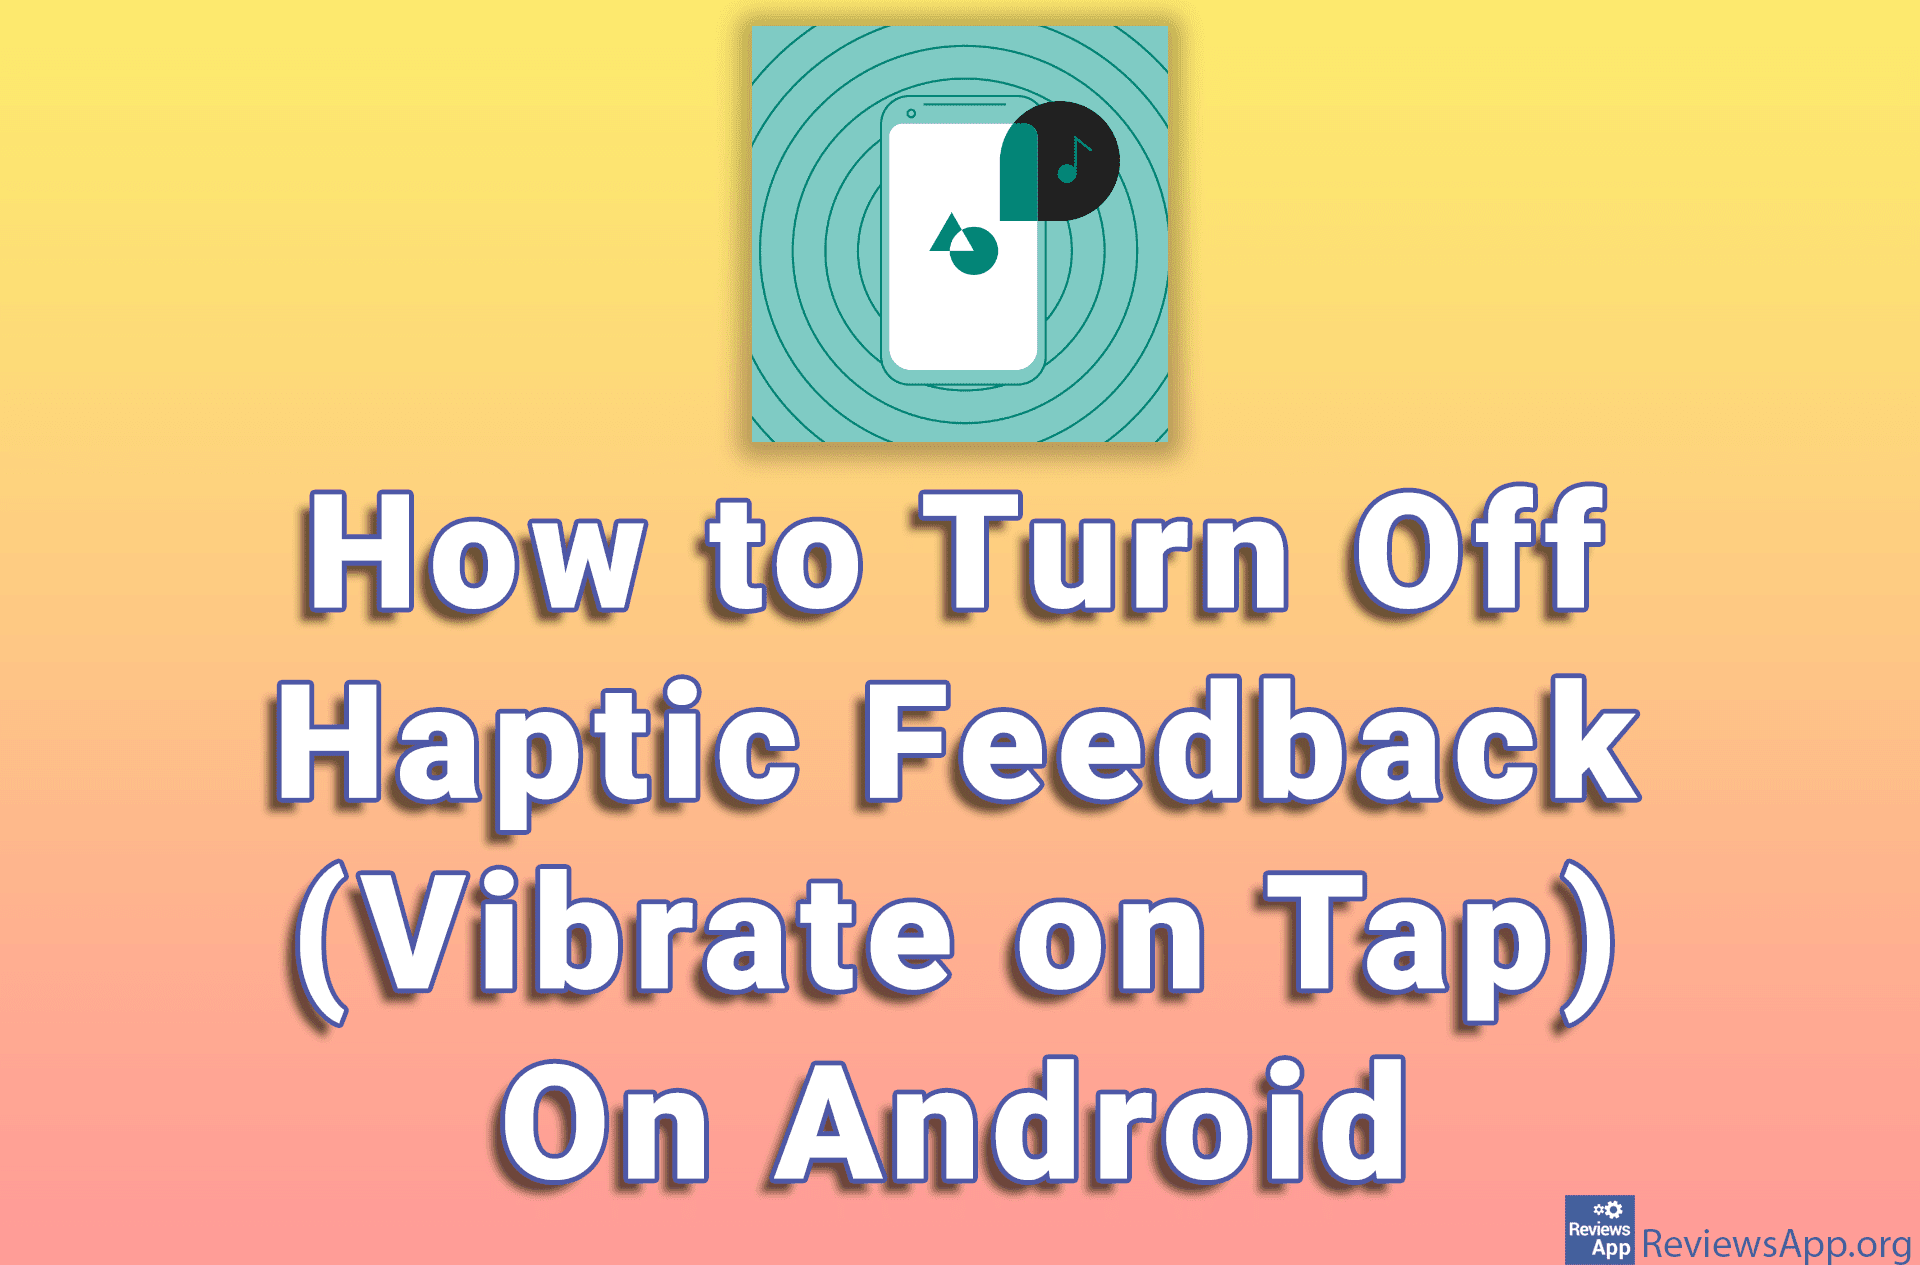 How to Turn Off Haptic Feedback (Vibrate on Tap) On Android